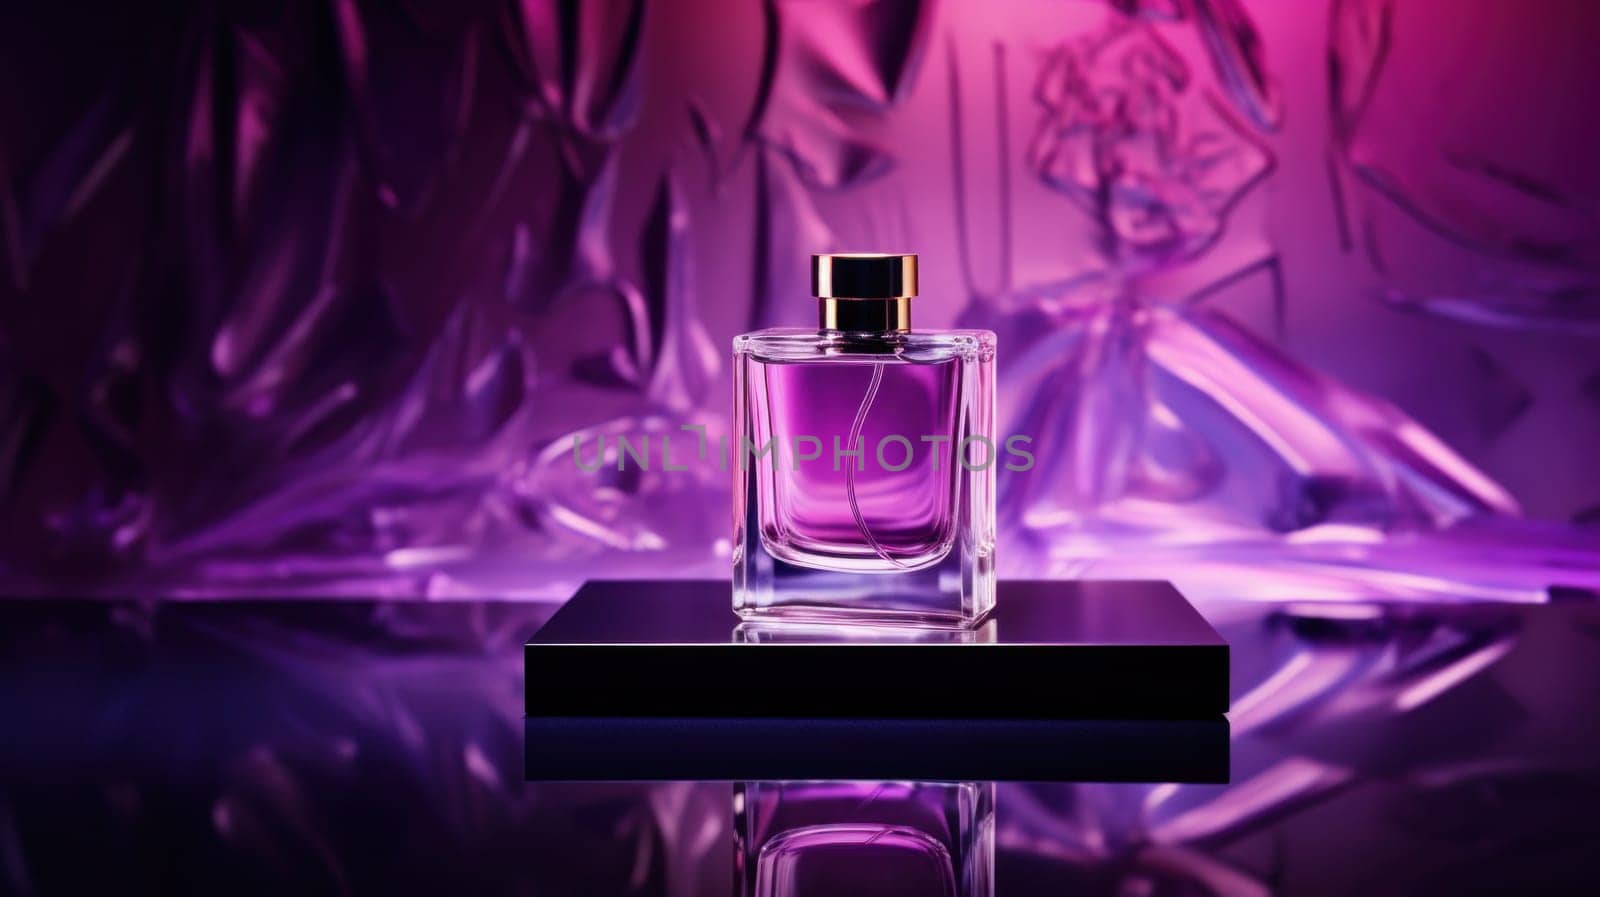 A perfume bottle on a black stand in front of purple background